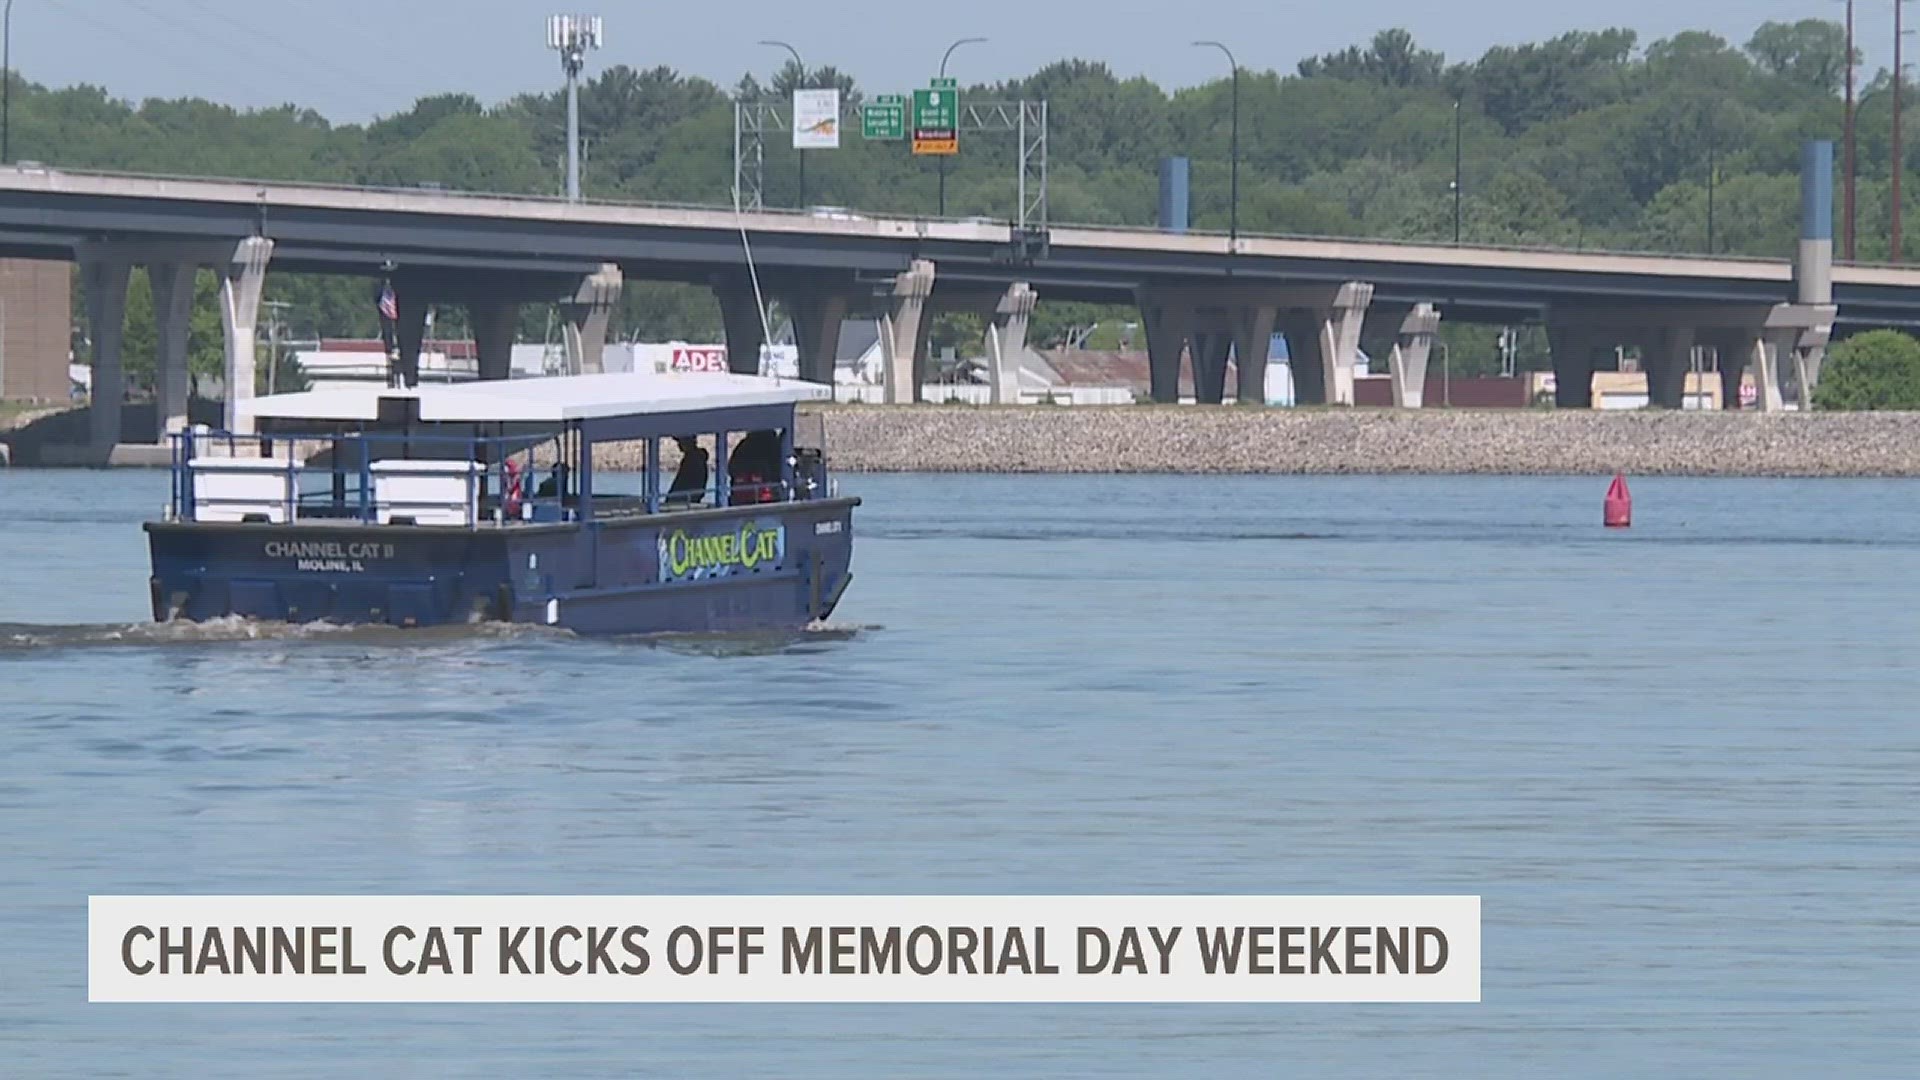 River taxis can be accessed at four docks: John Deere Commons & Riverbend Commons in Moline, the Isle Casino Hotel in Bettendorf, and the Village of East Davenport.